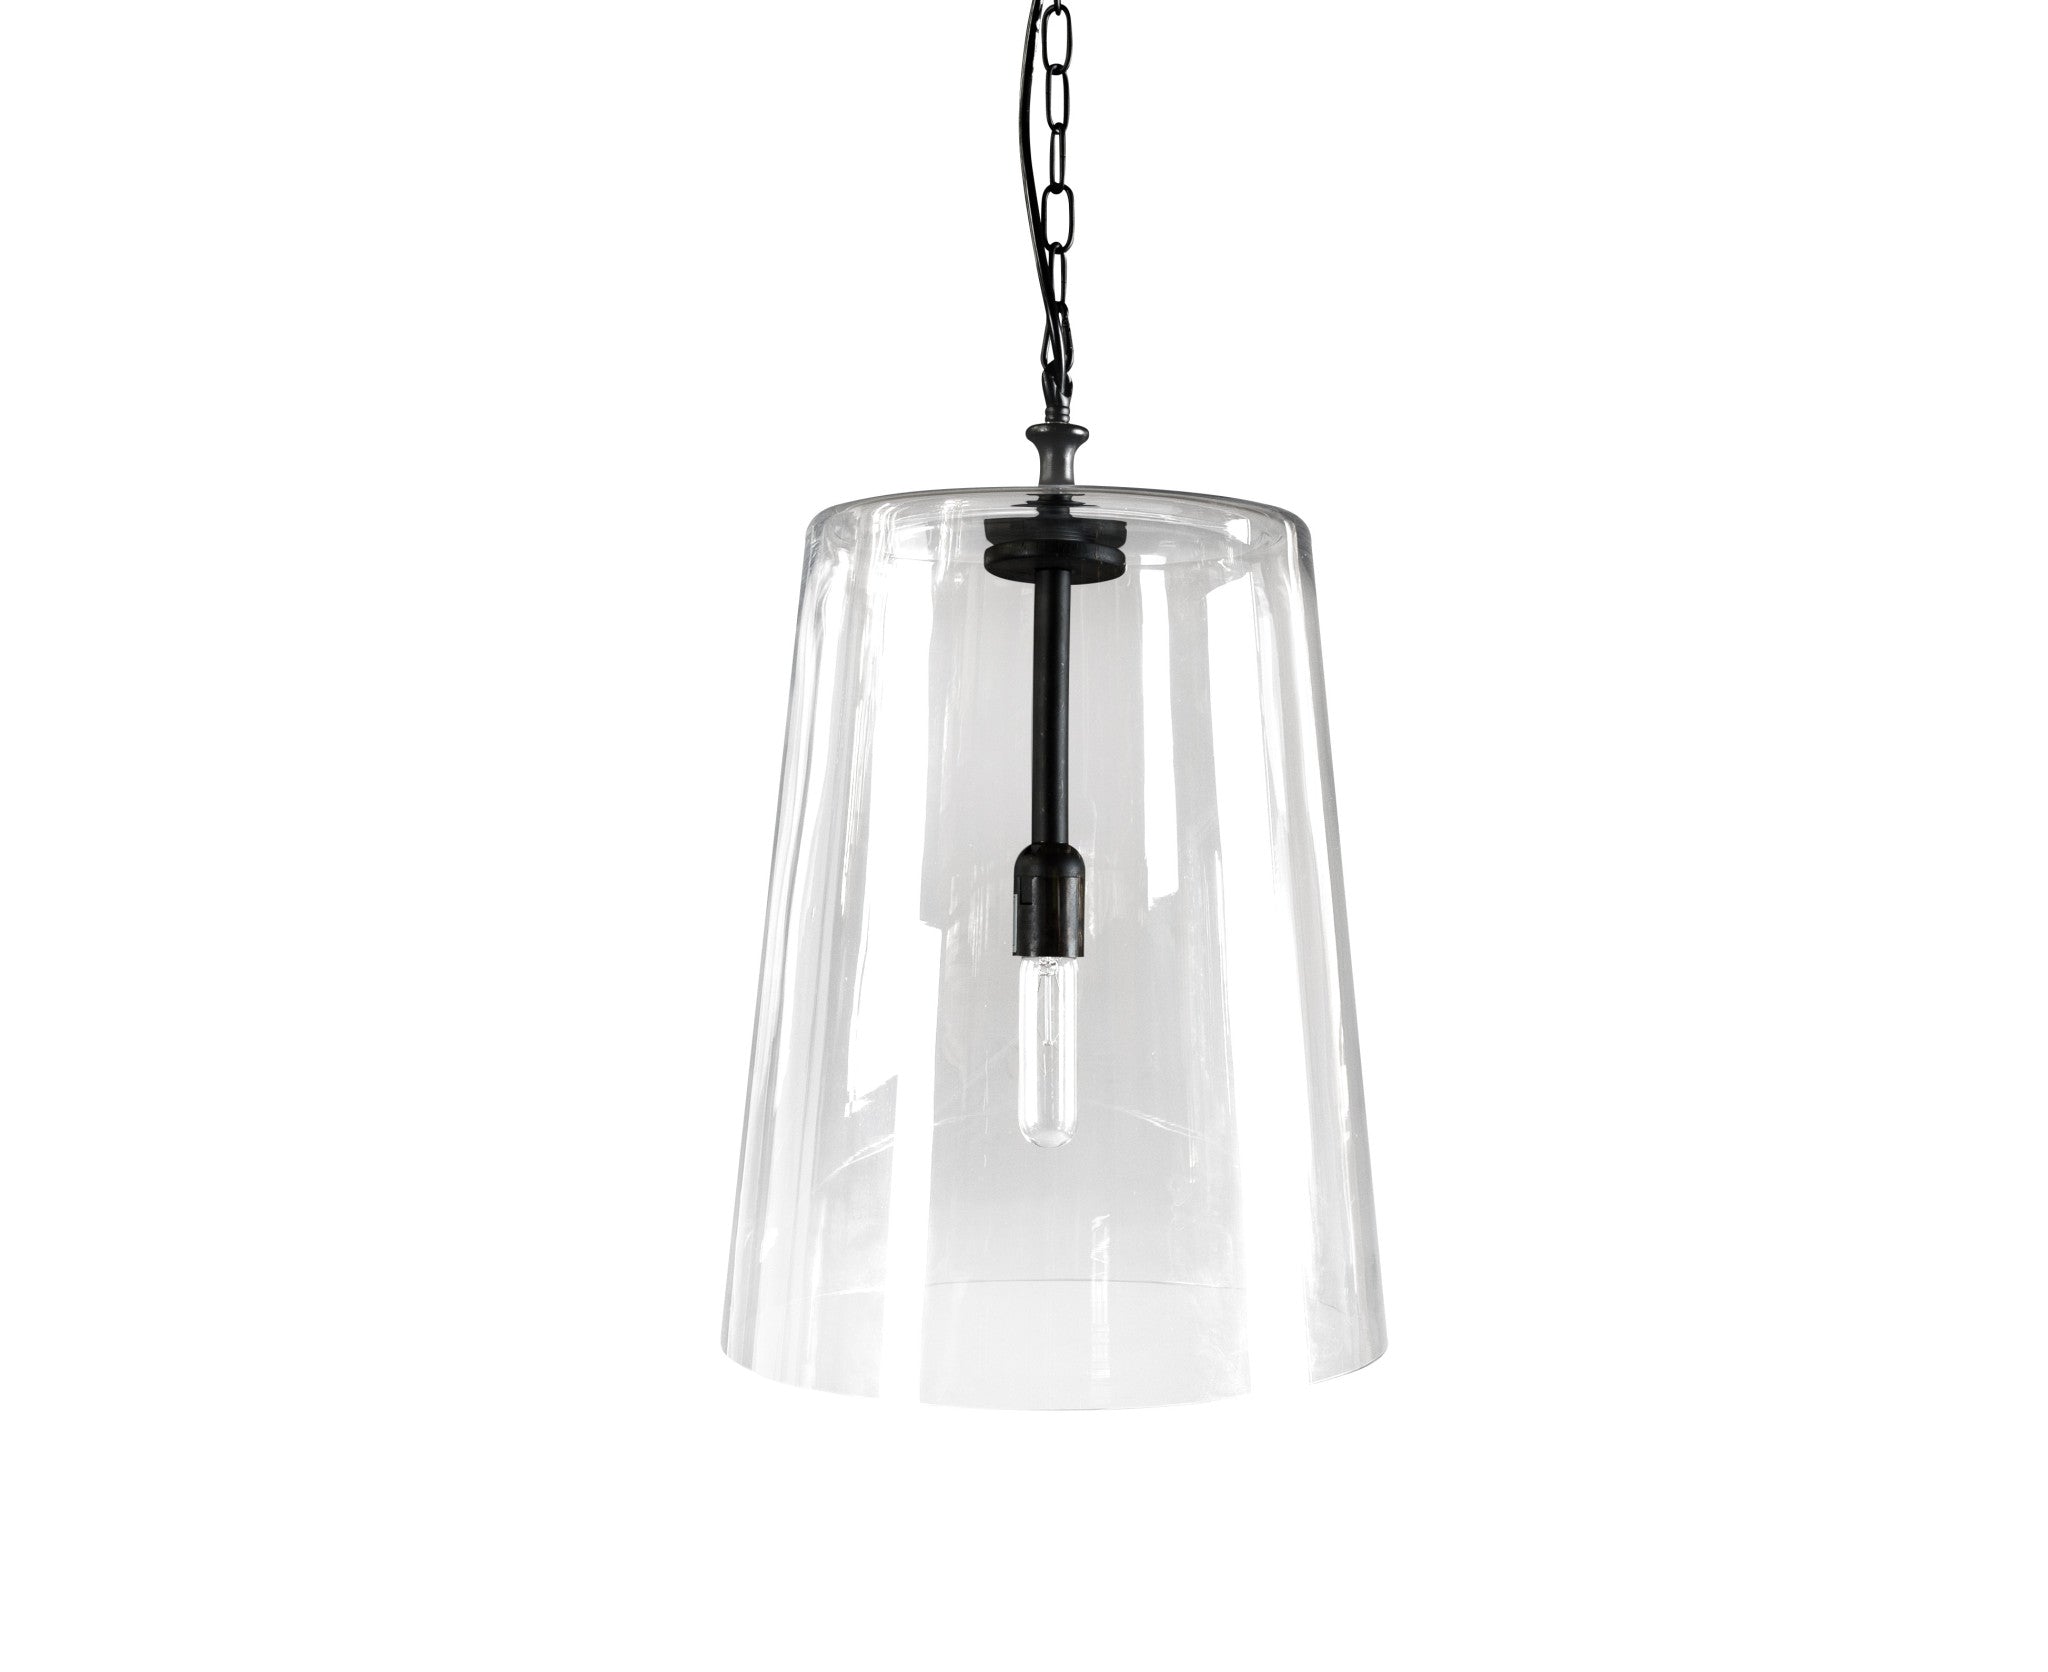 Single Glass Dimmable Semi-Flush Ceiling Light With Clear Shades